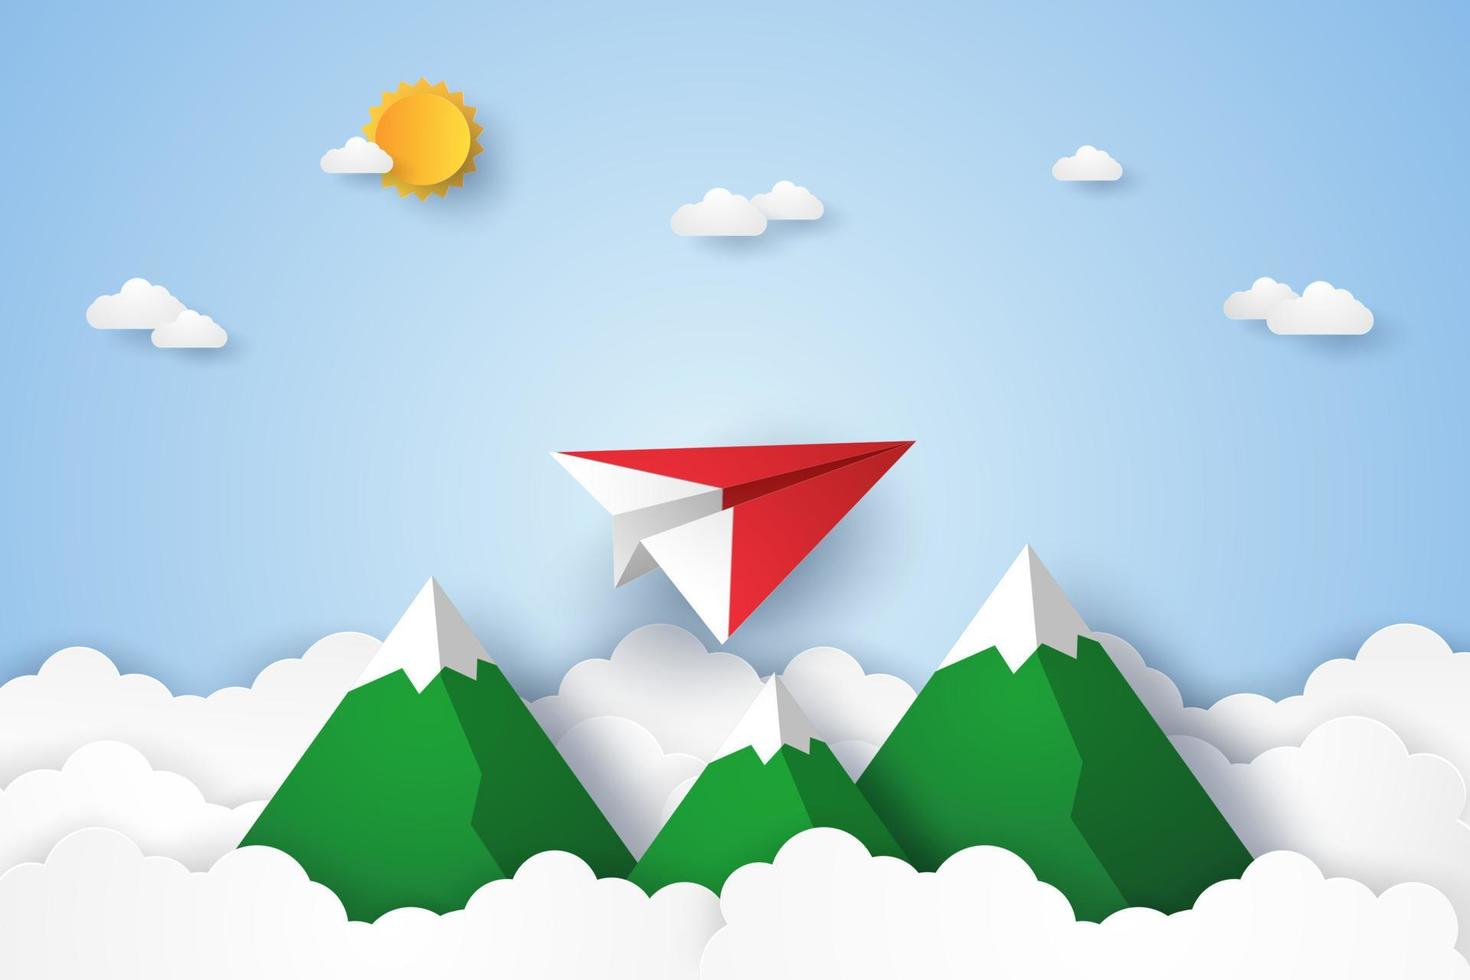 Origami plane flying in the sky, mountain , paper art style vector